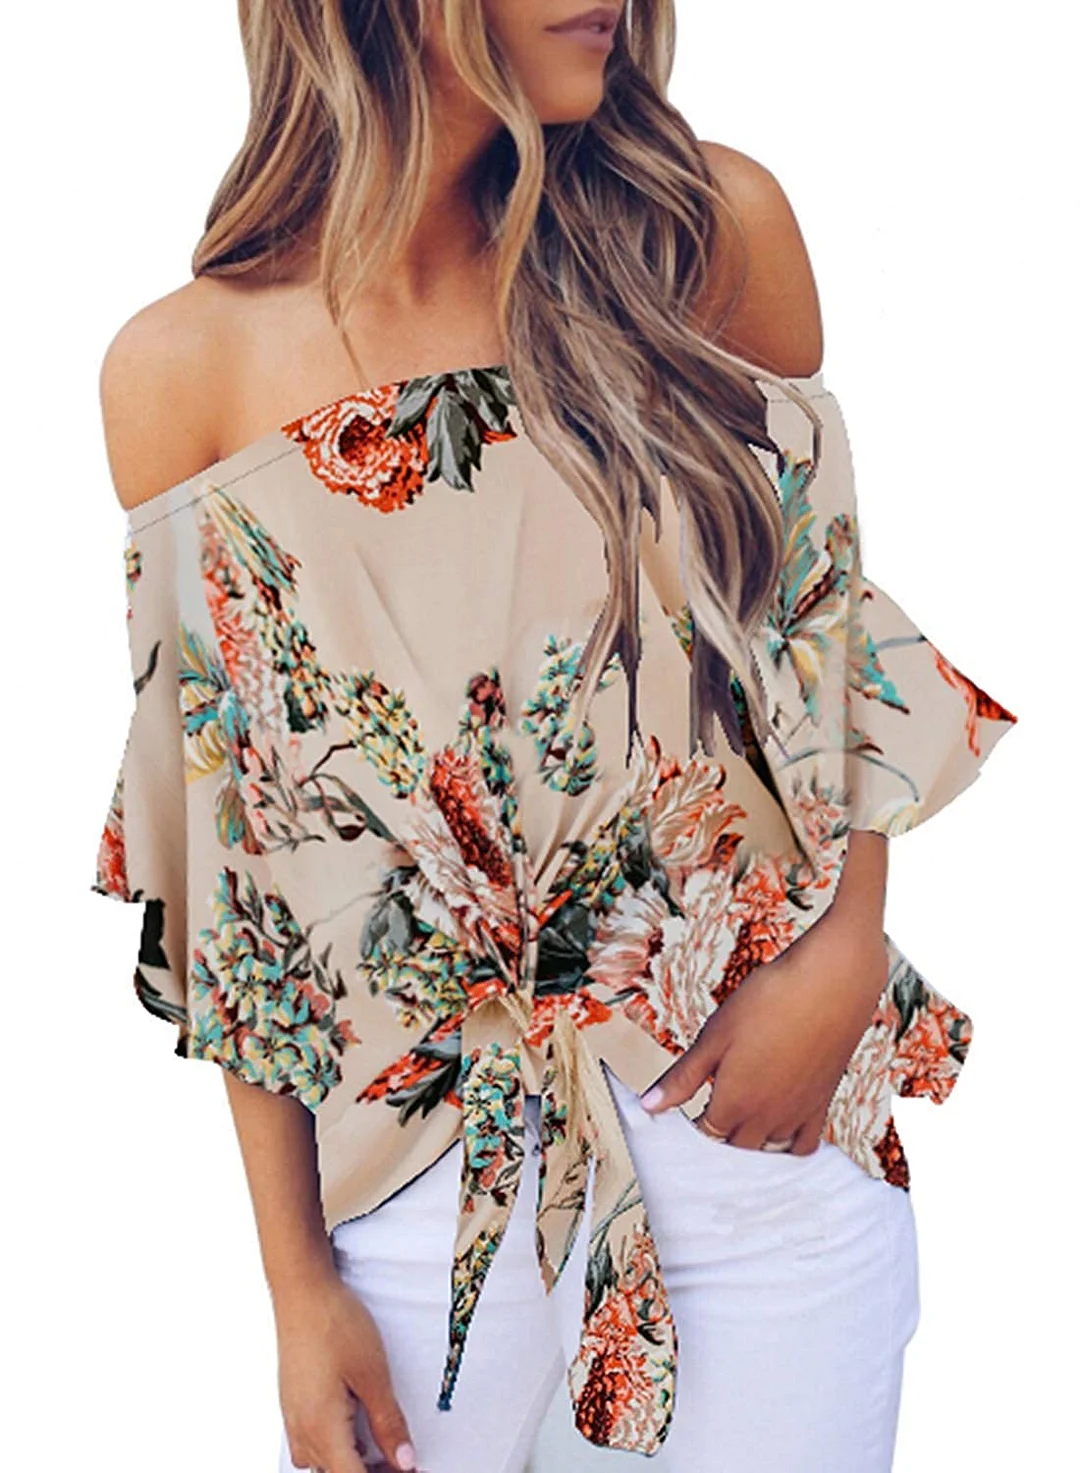 Womens Summer Off The Shoulder Tops 3/4 Bell Sleeves Sexy Floral Tie Knot T-Shirt Blouse